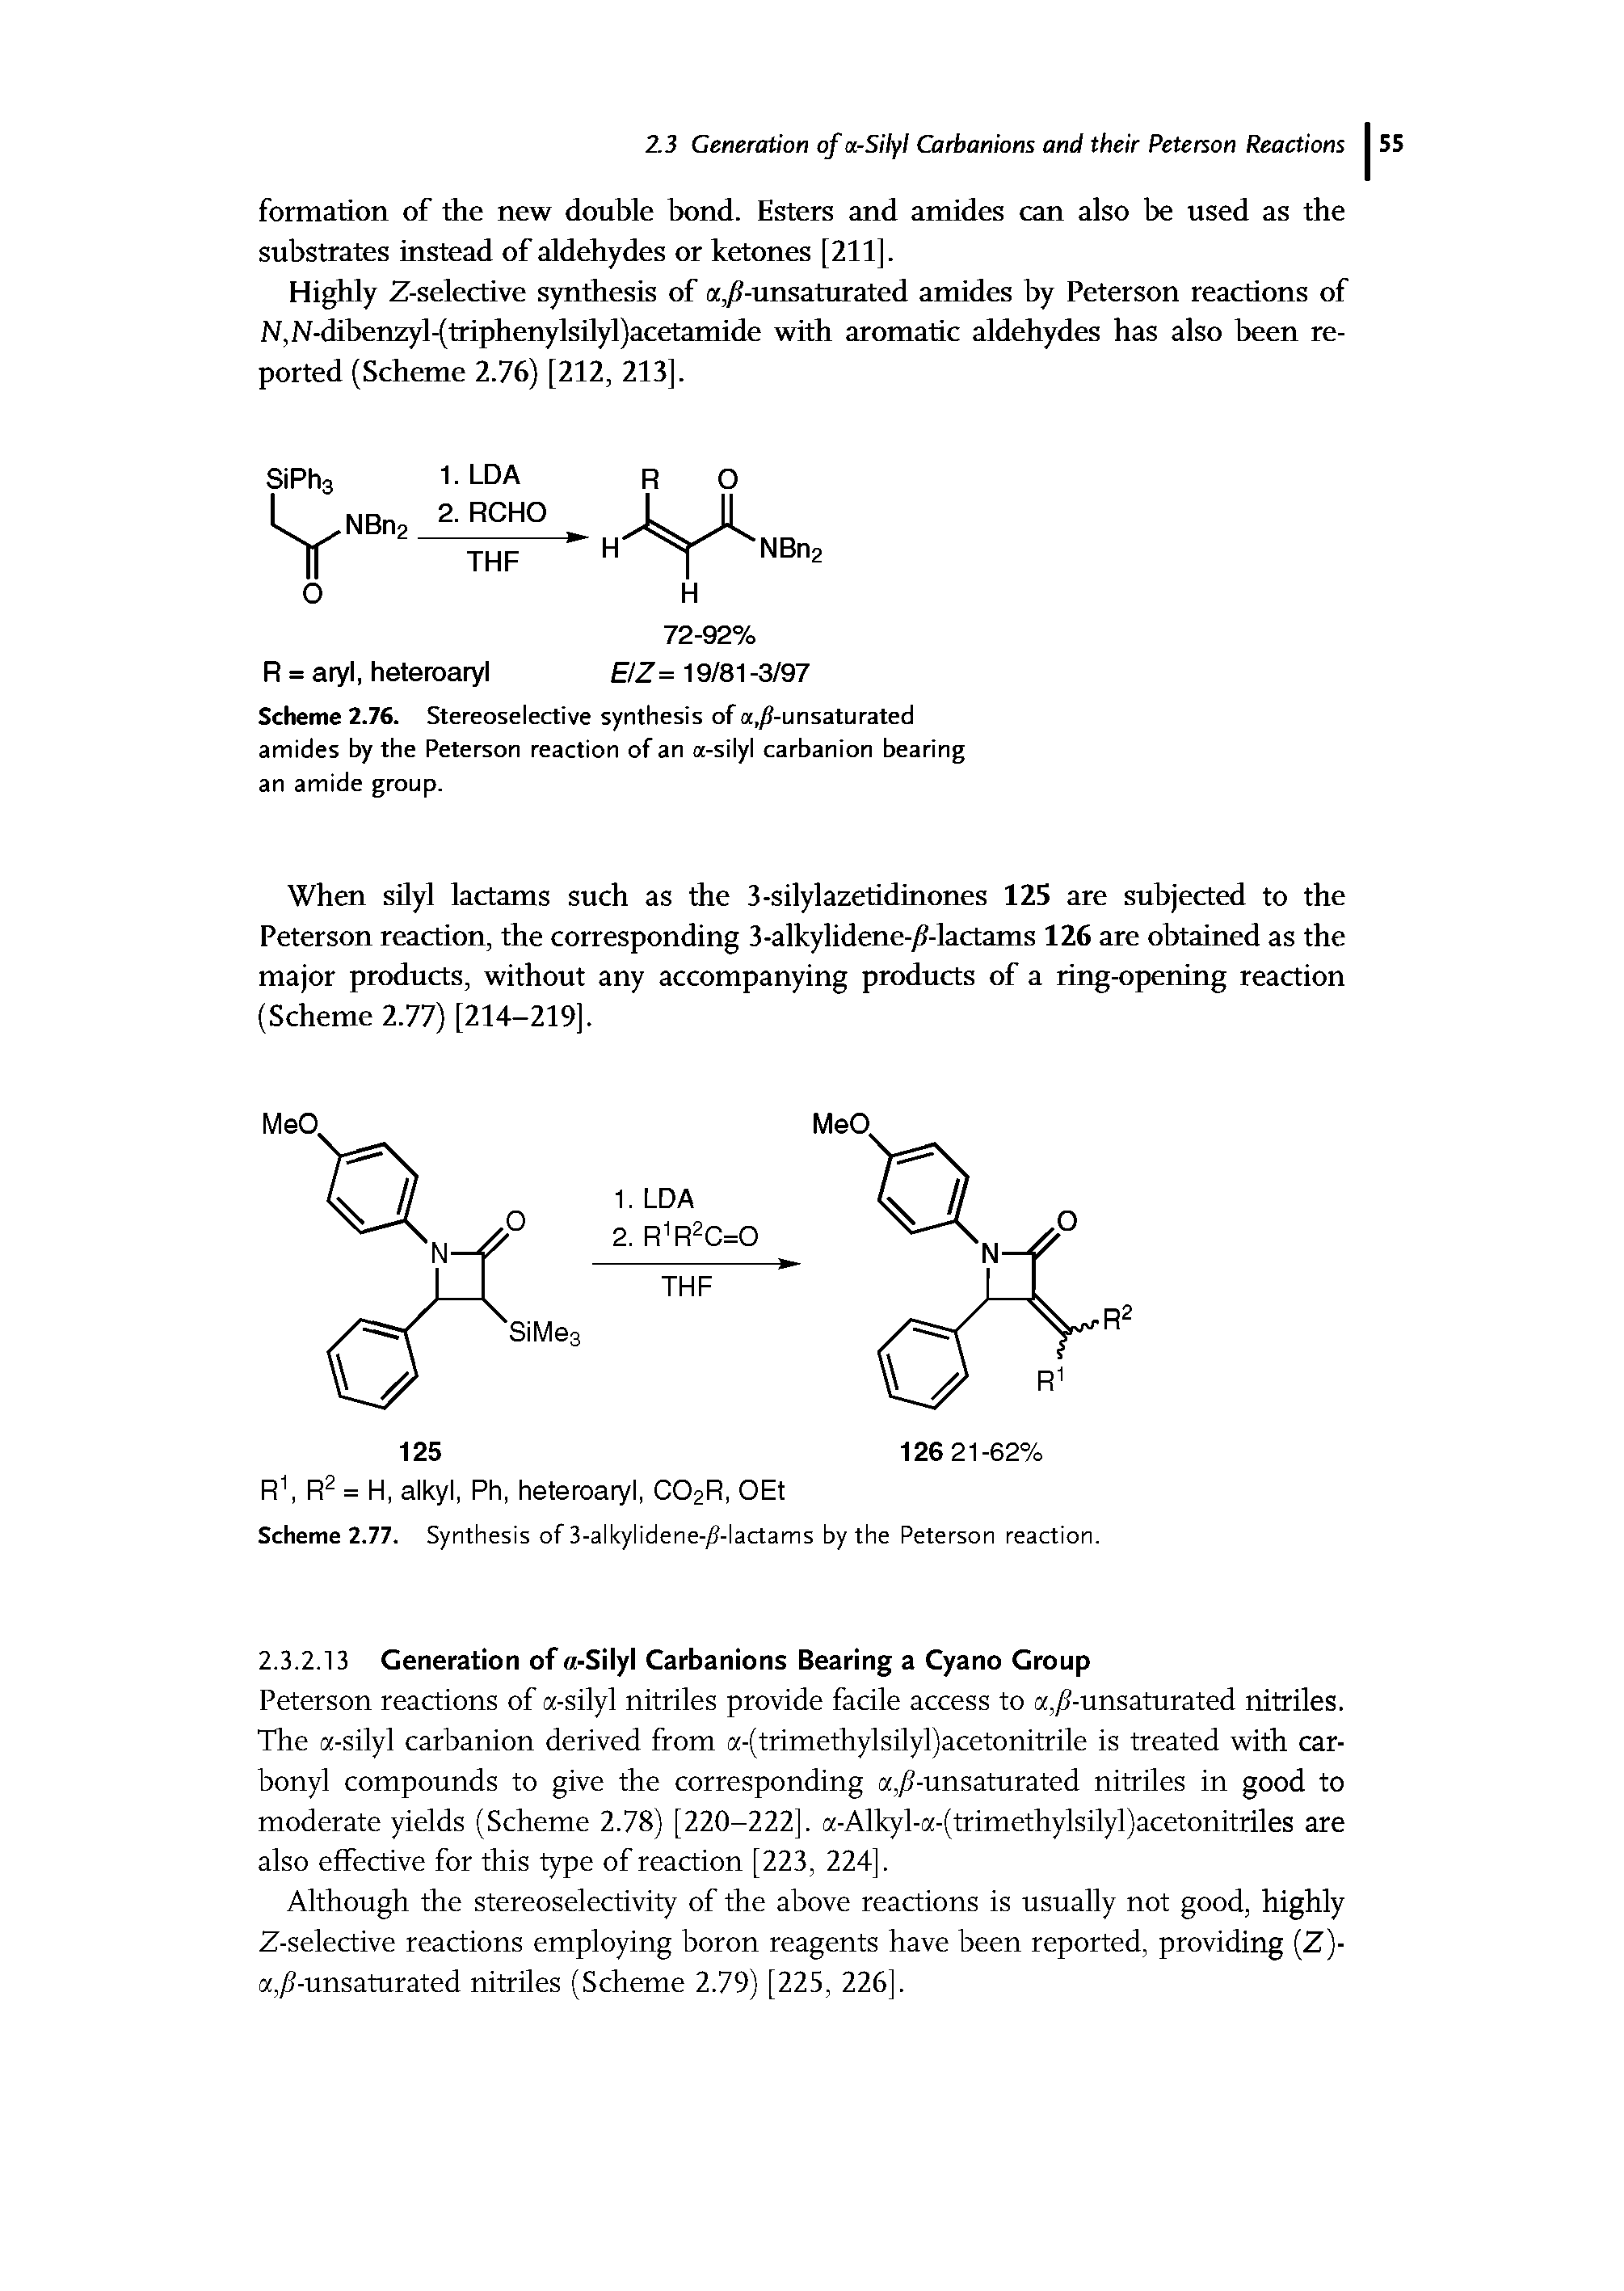 Scheme 2.77. Synthesis of 3-alkylidene-/S-lactams by the Peterson reaction.